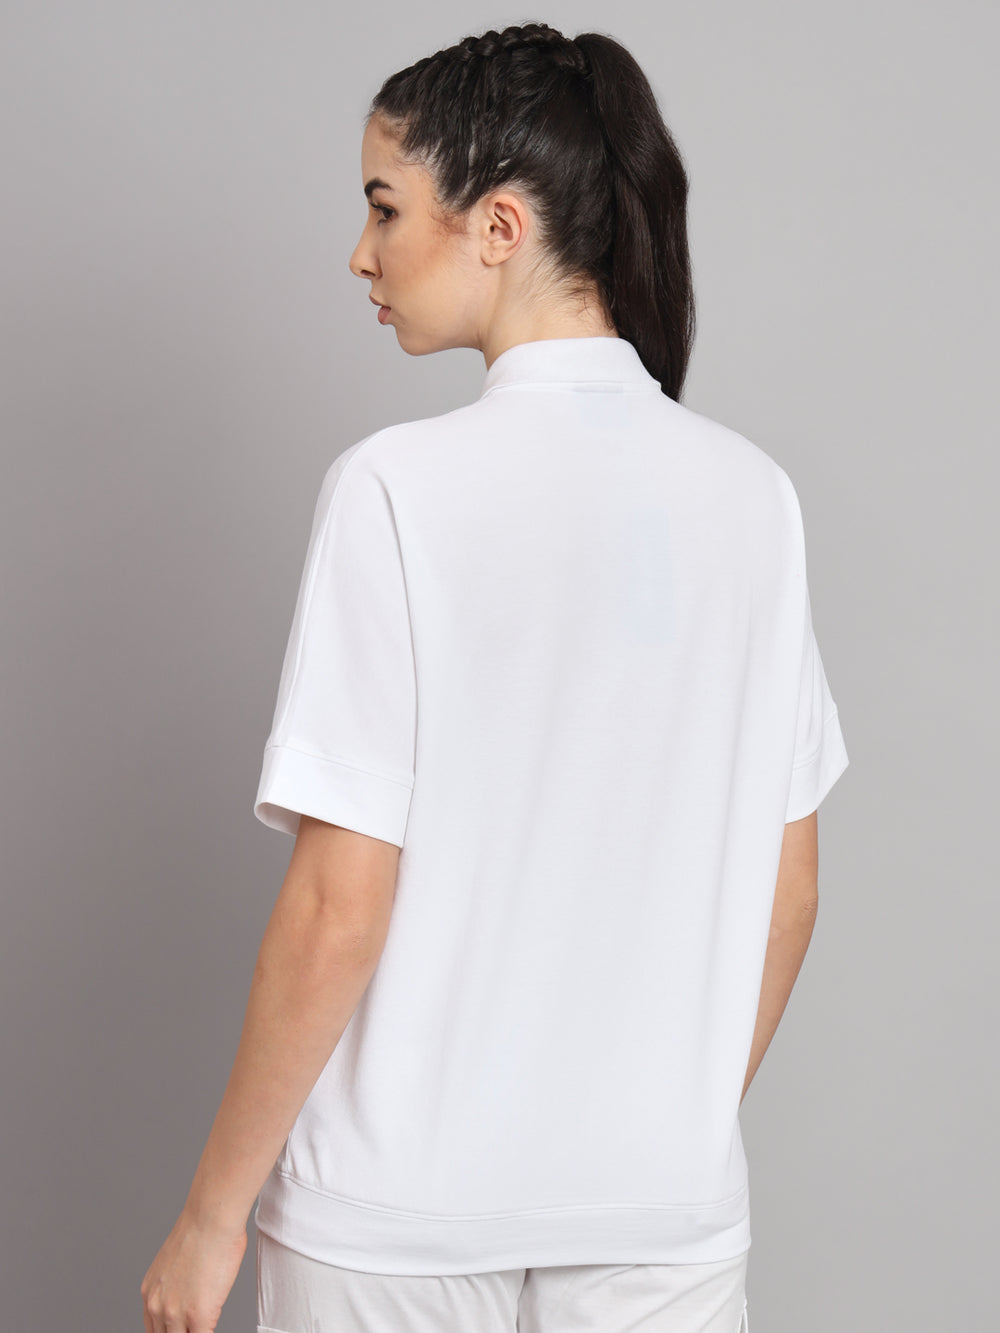 GRIFFEL Women Basic Solid White Printed Polo T-shirt - griffel